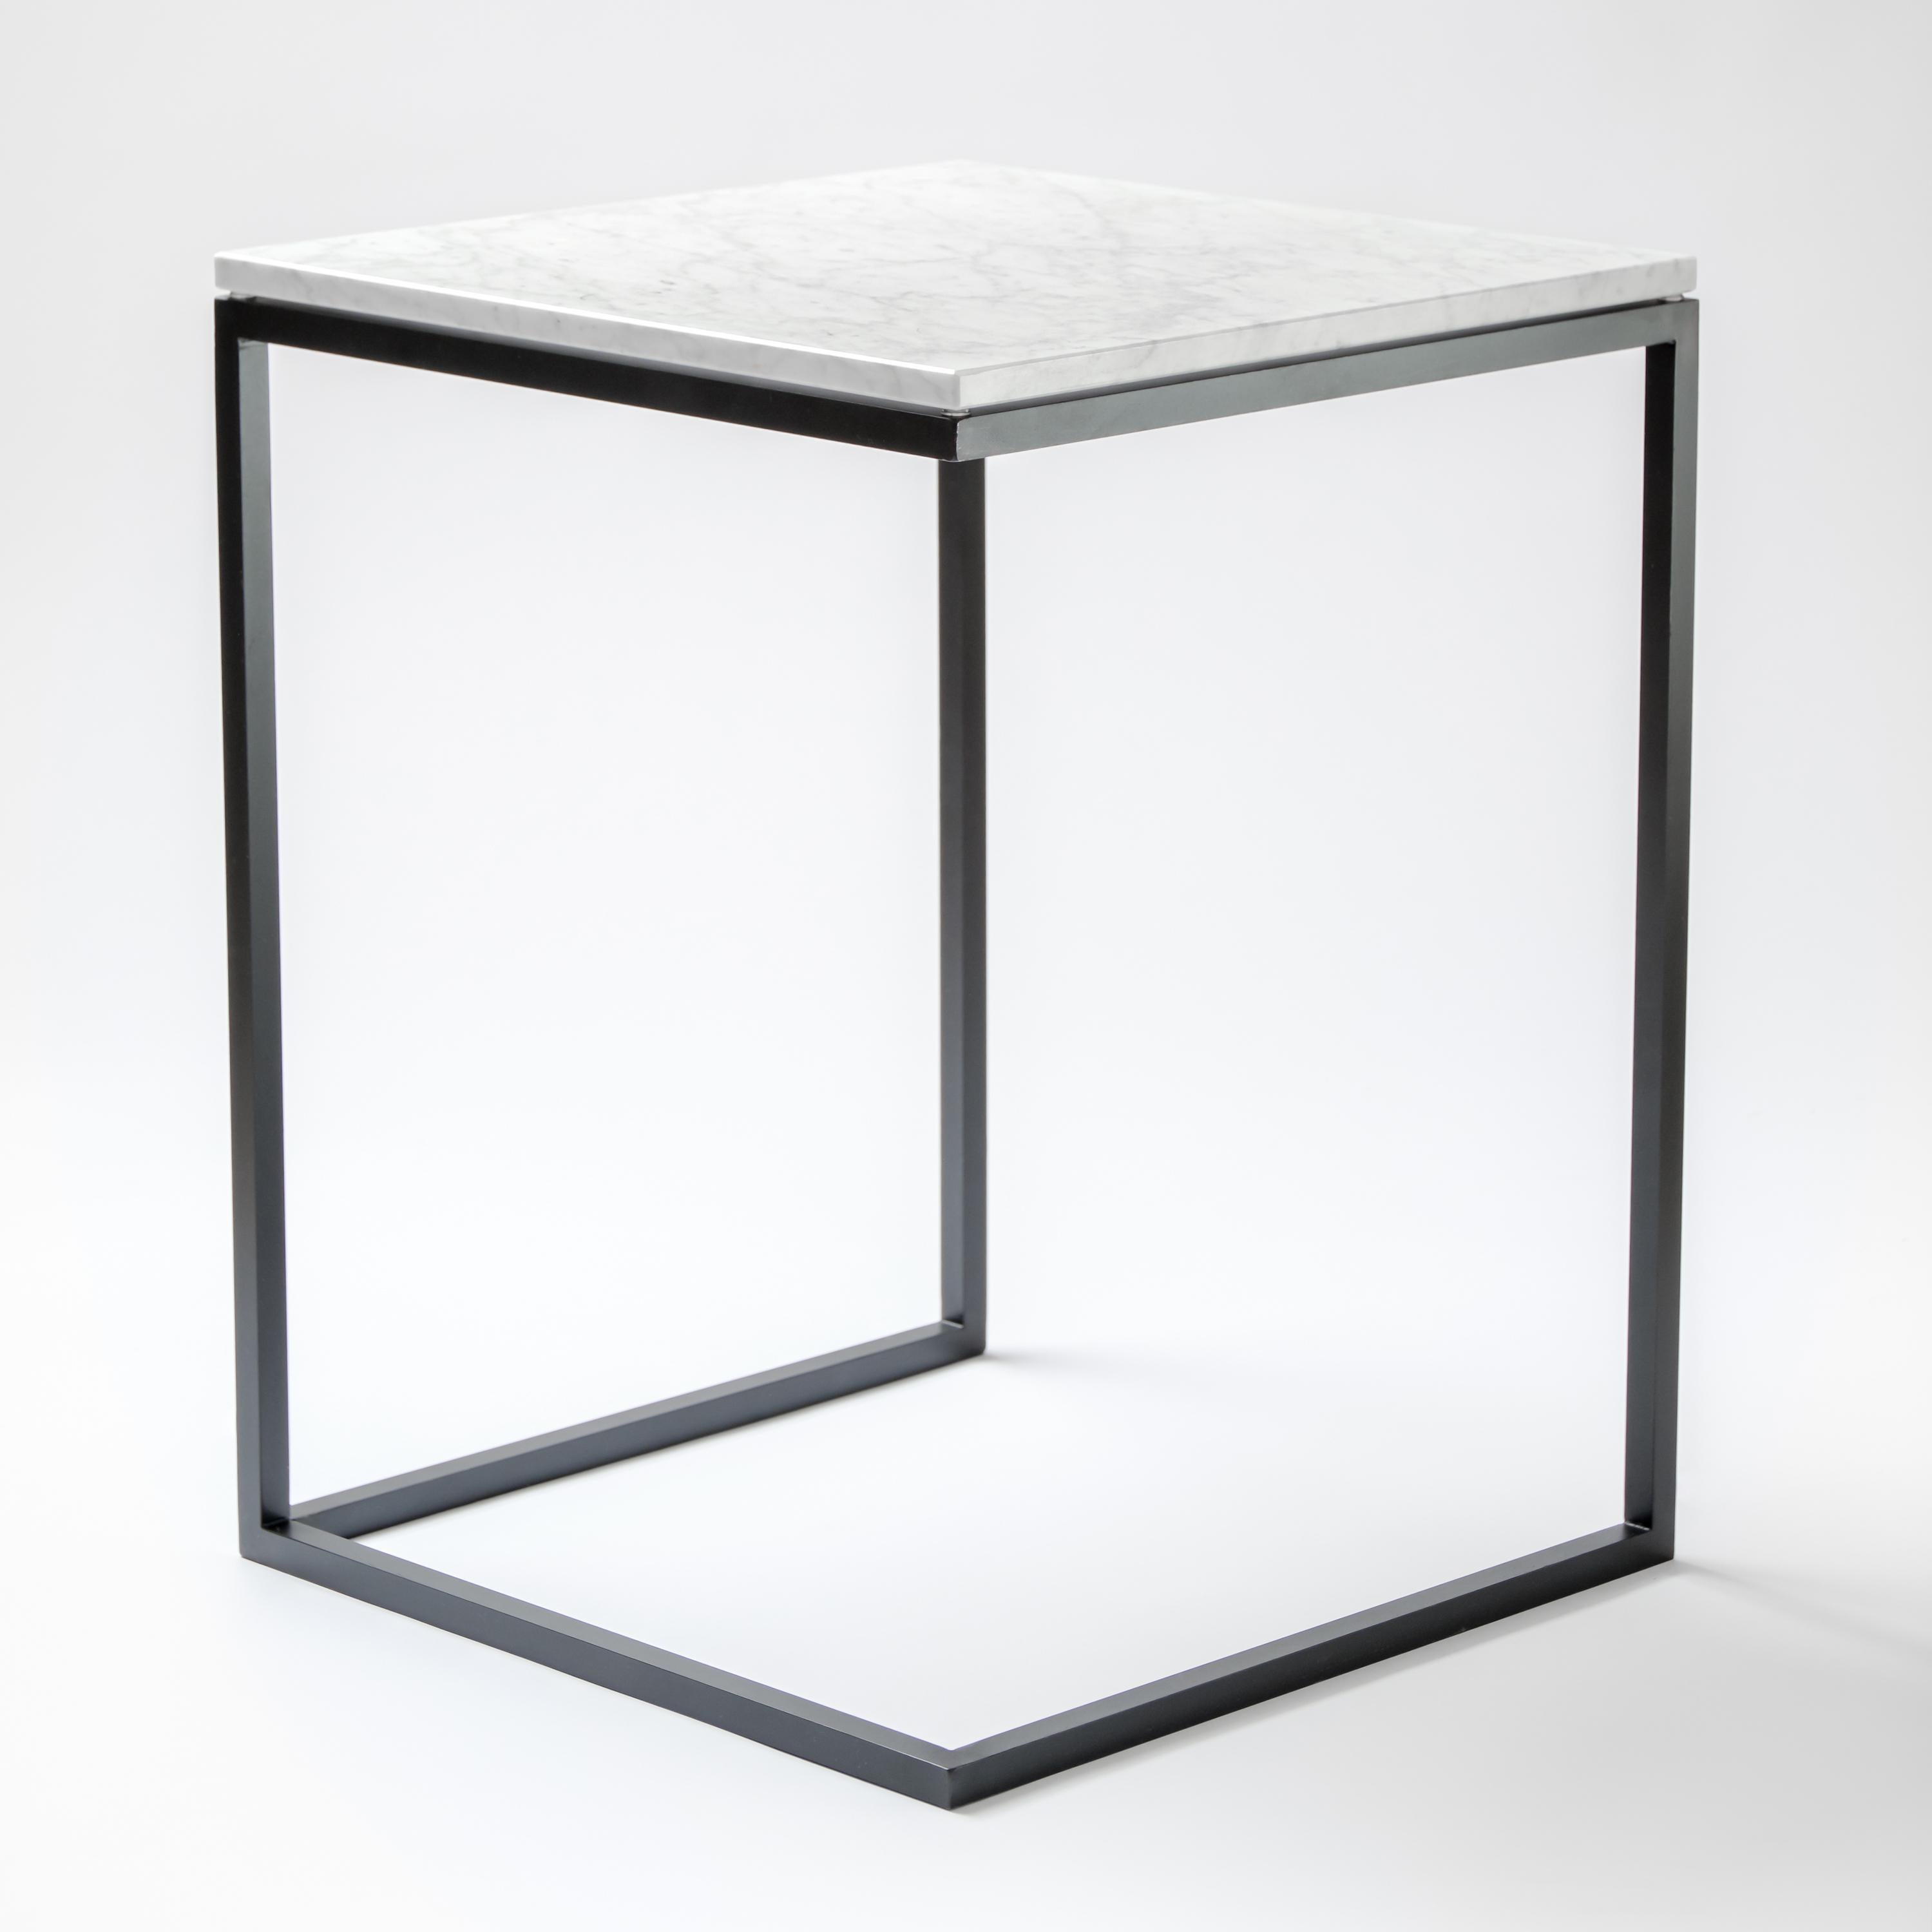 Polished “Esopo” Modern Handmade Iron Side Table with White Carrara Marble Square Plan For Sale